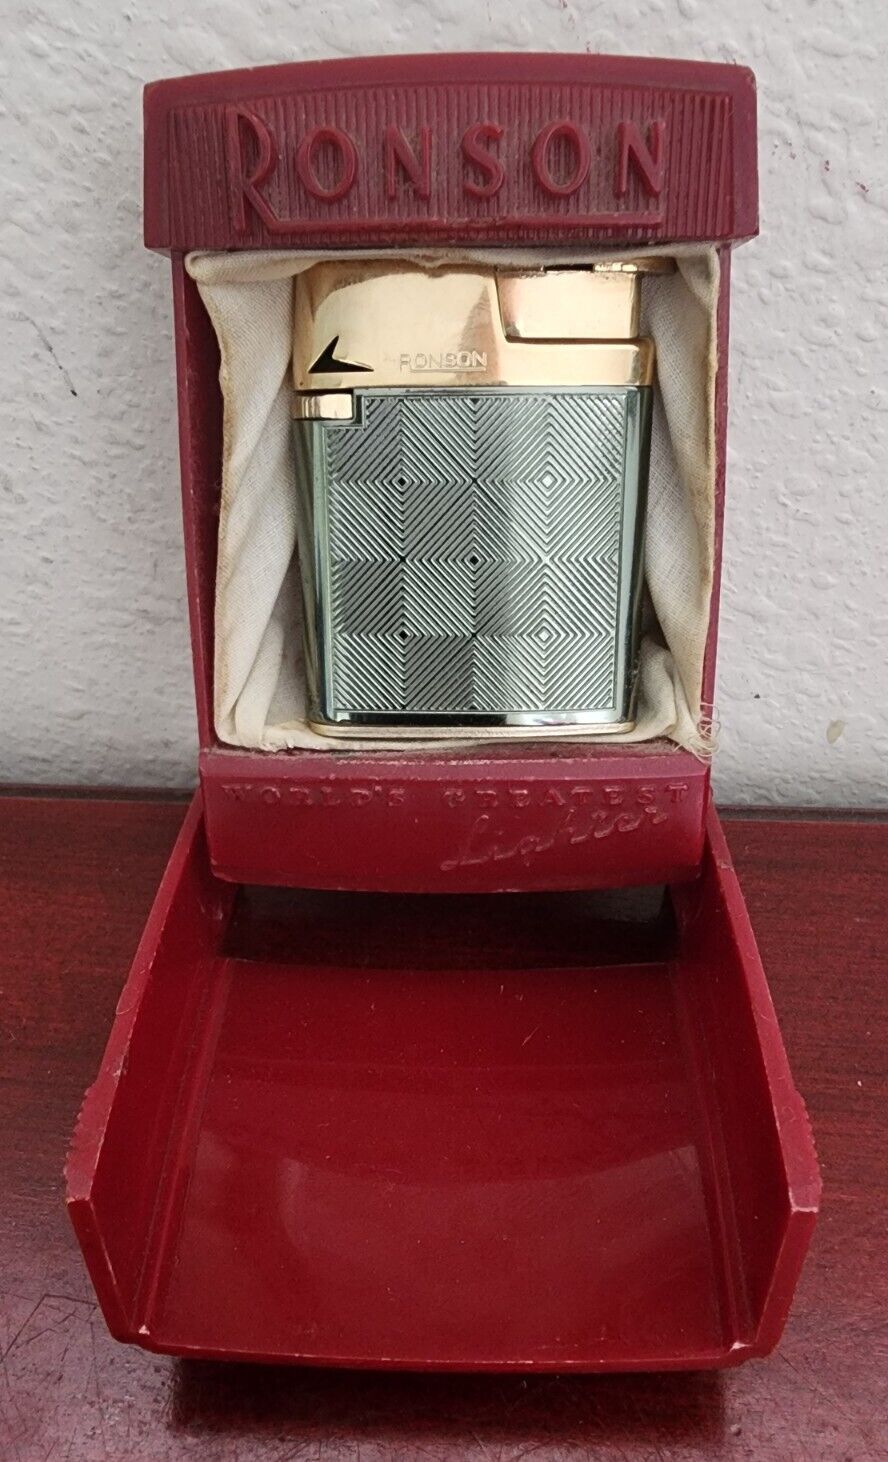 VINTAGE RONSON WORLD'S GREATEST LIGHTER VARAFLAME MK II. MADE IN USA. W/BOX